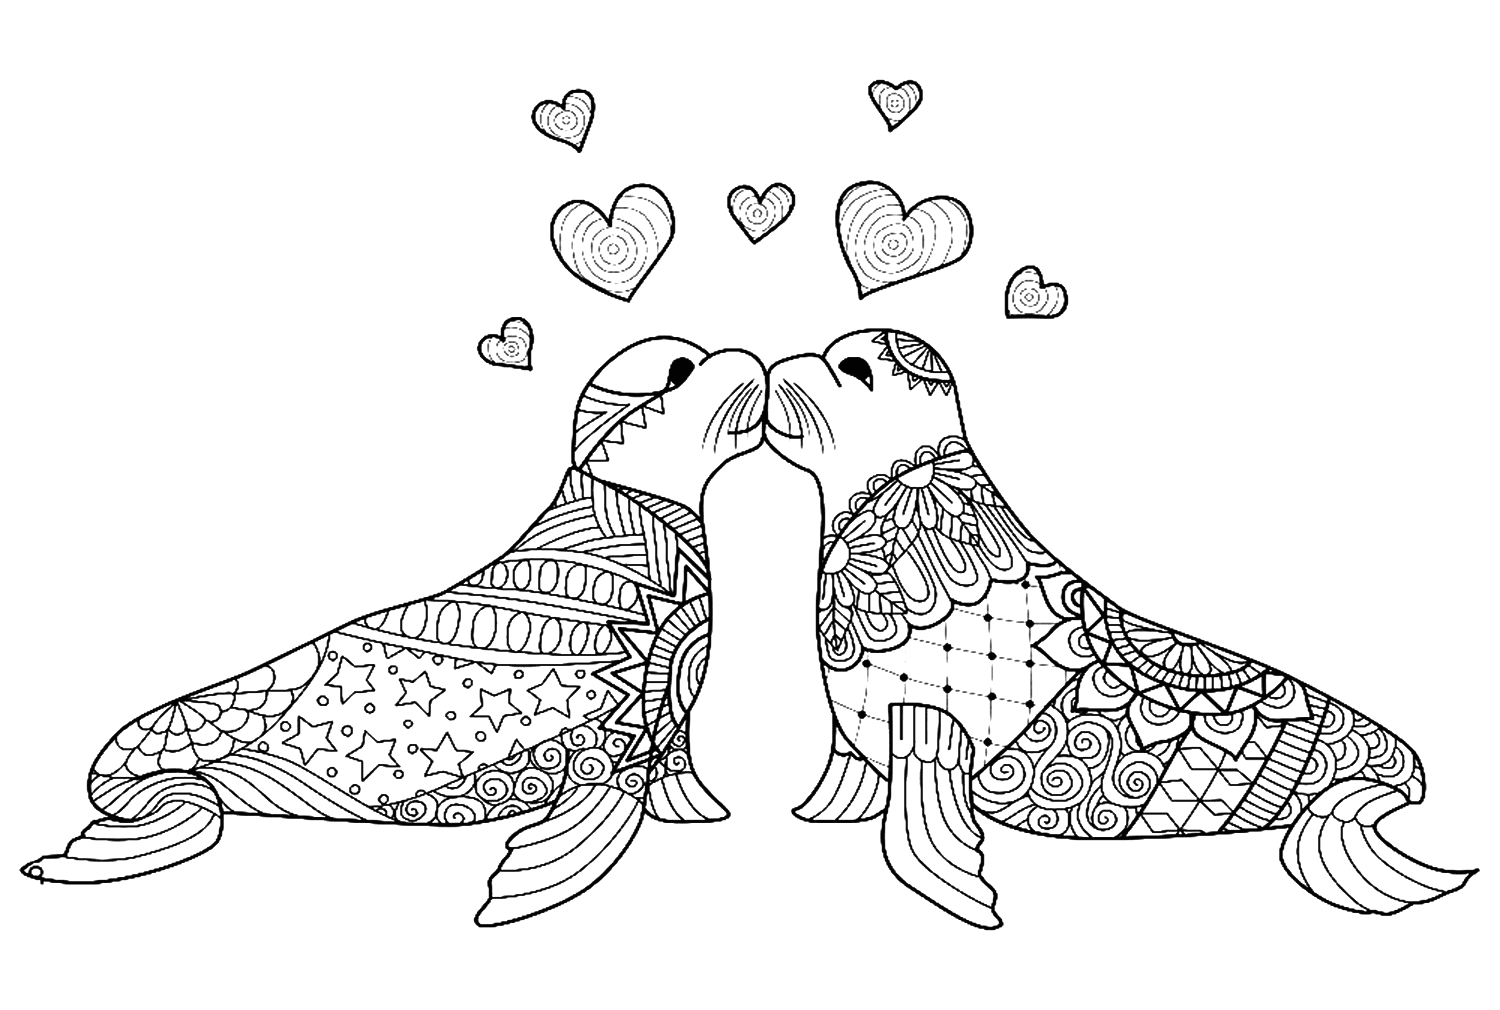 Zentangle Sea Lion Couple In Love from Sea Lion